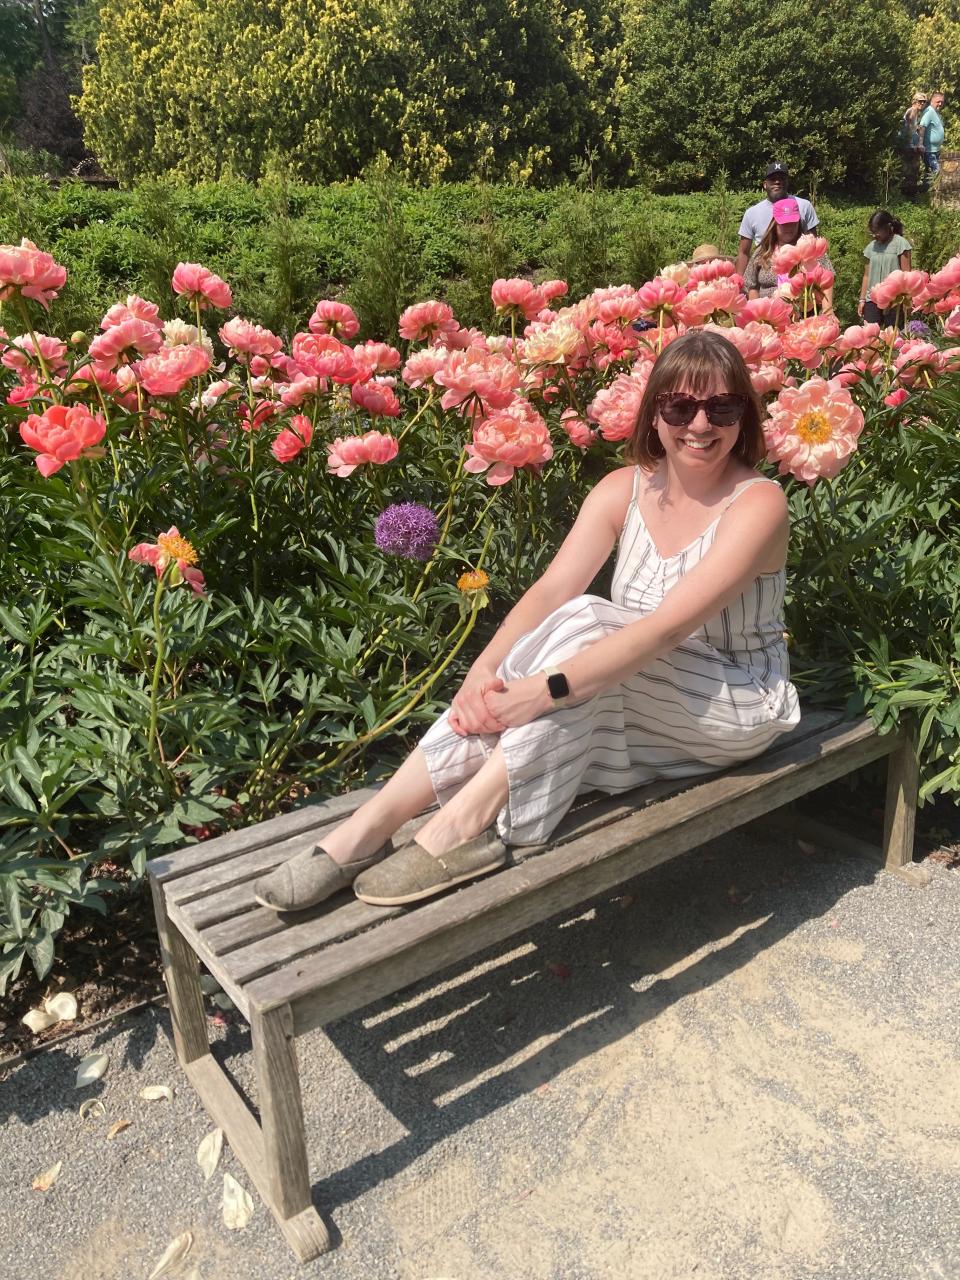 Delaware Online/The News Journal reporter Amanda Fries visits Longwood Gardens for the first time.